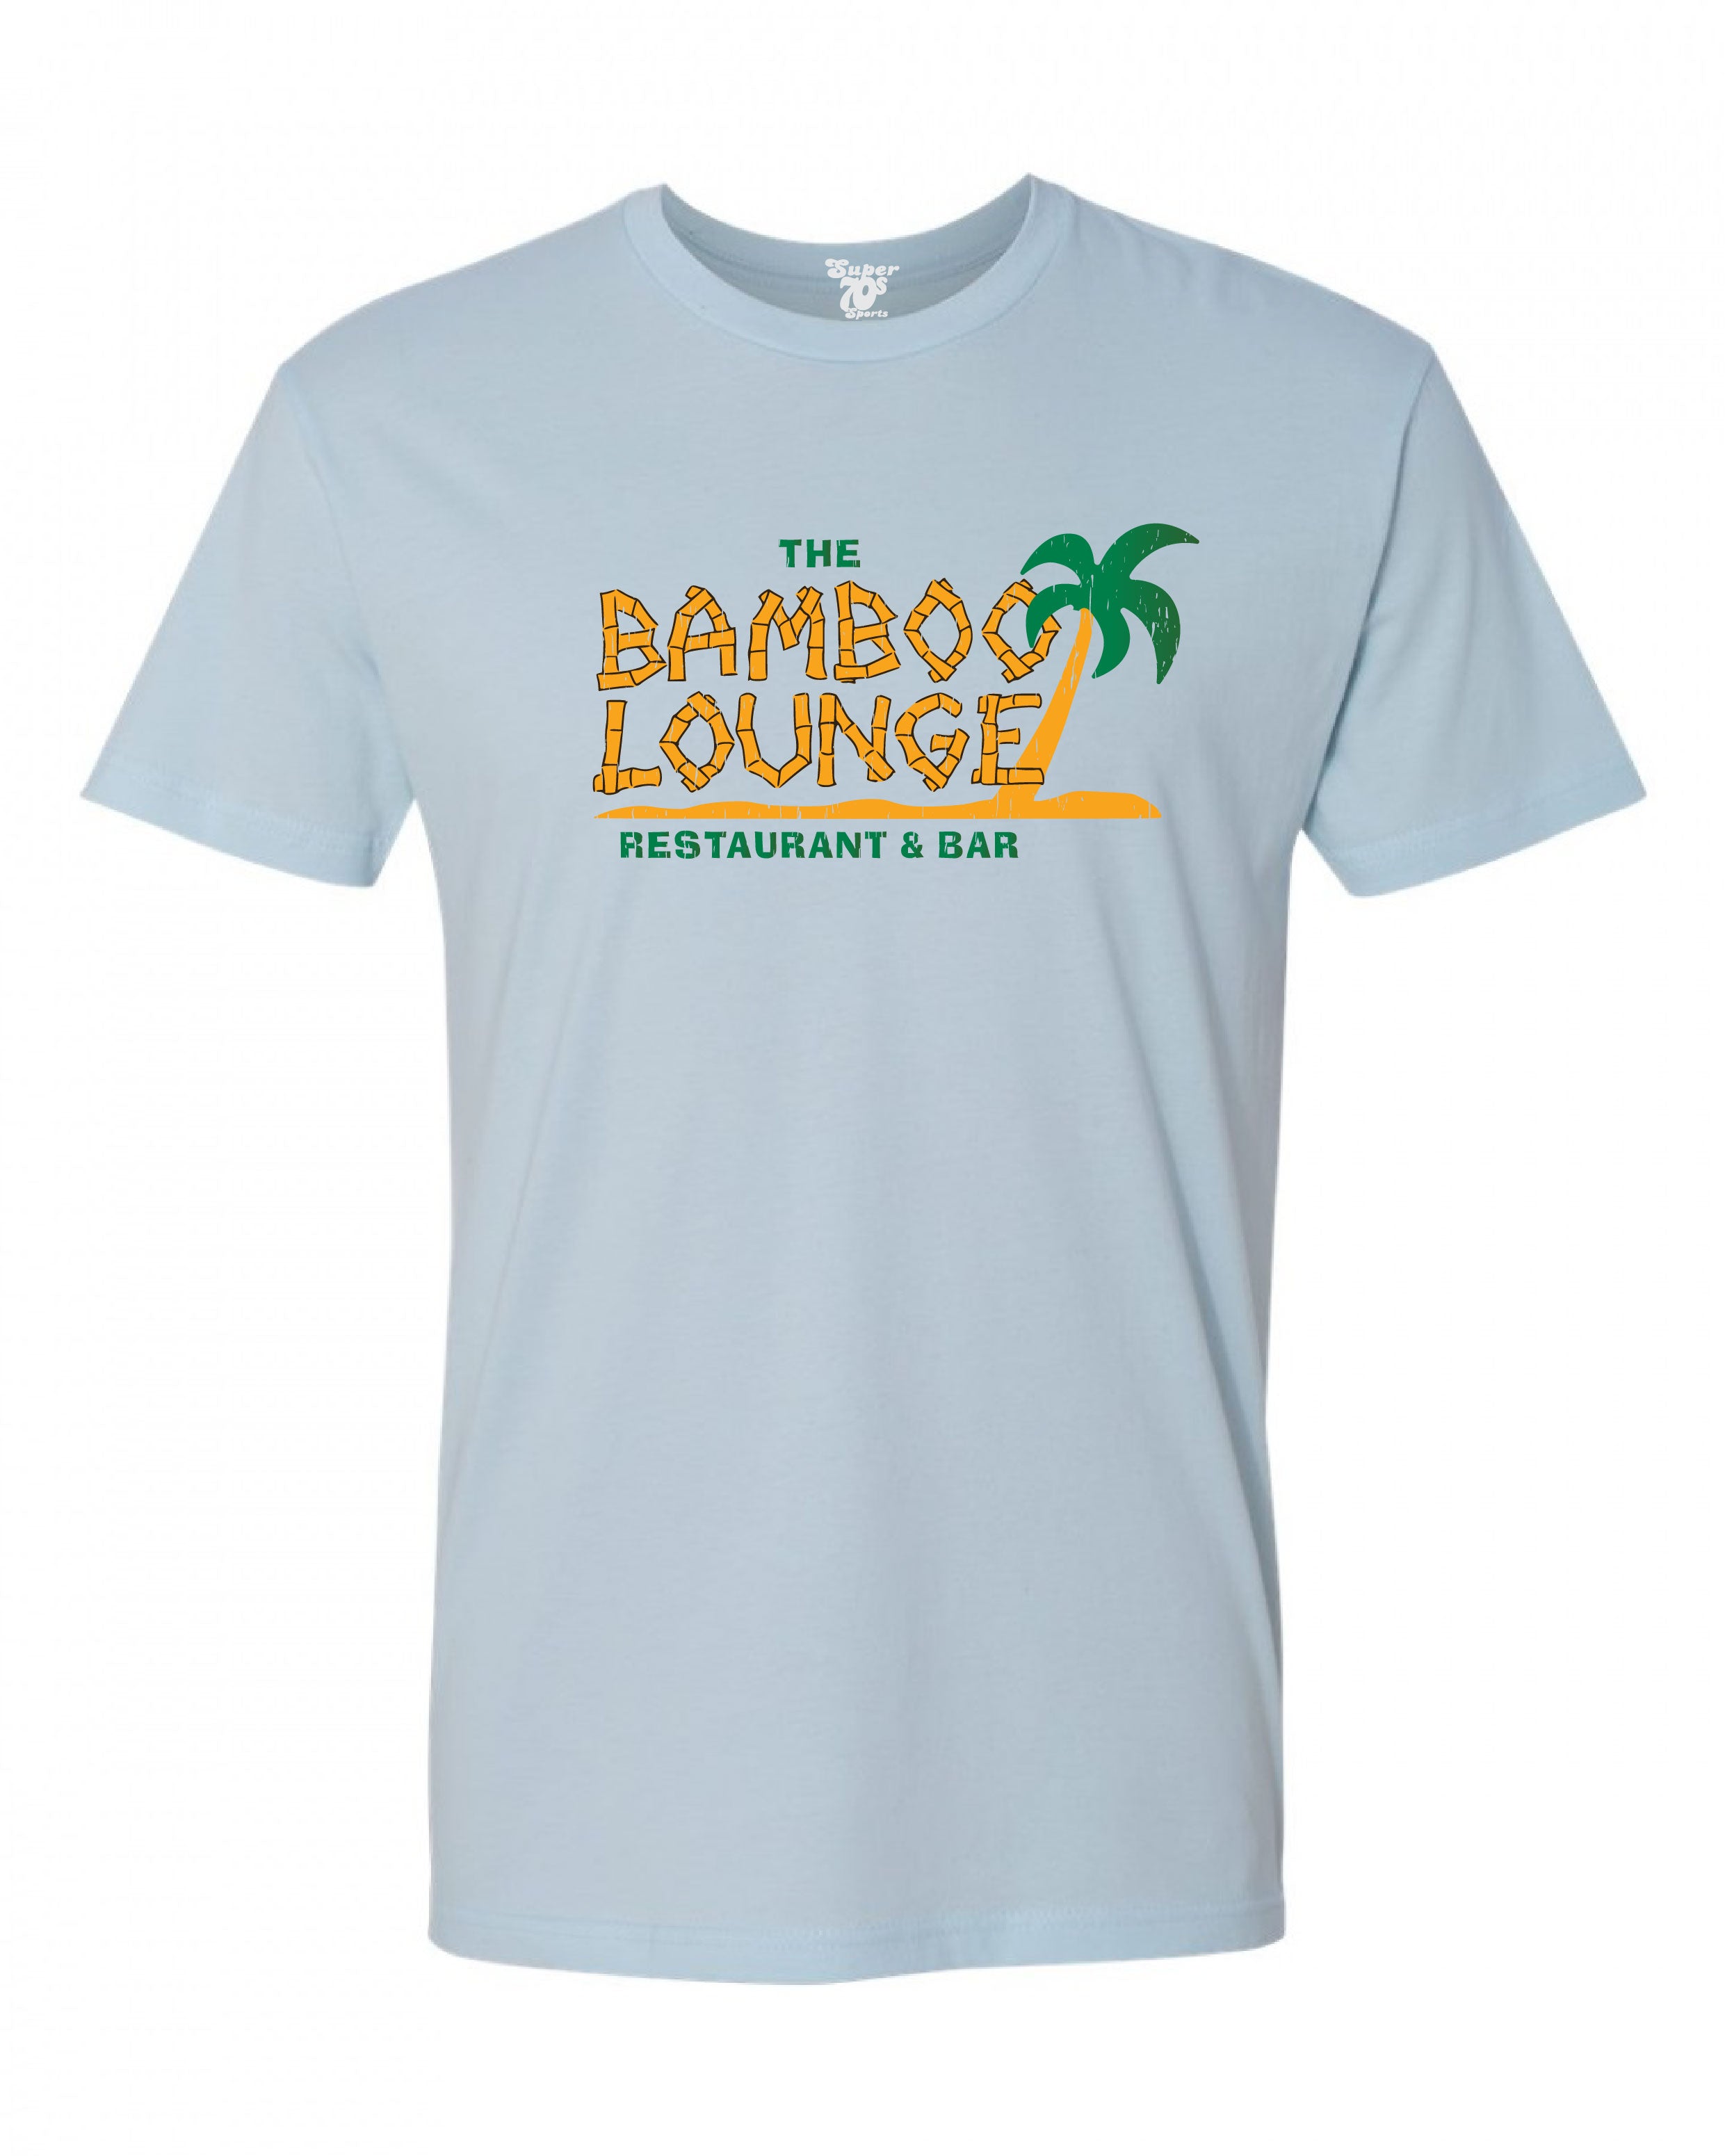 The Bamboo Lounge Tee – Super 70s Sports